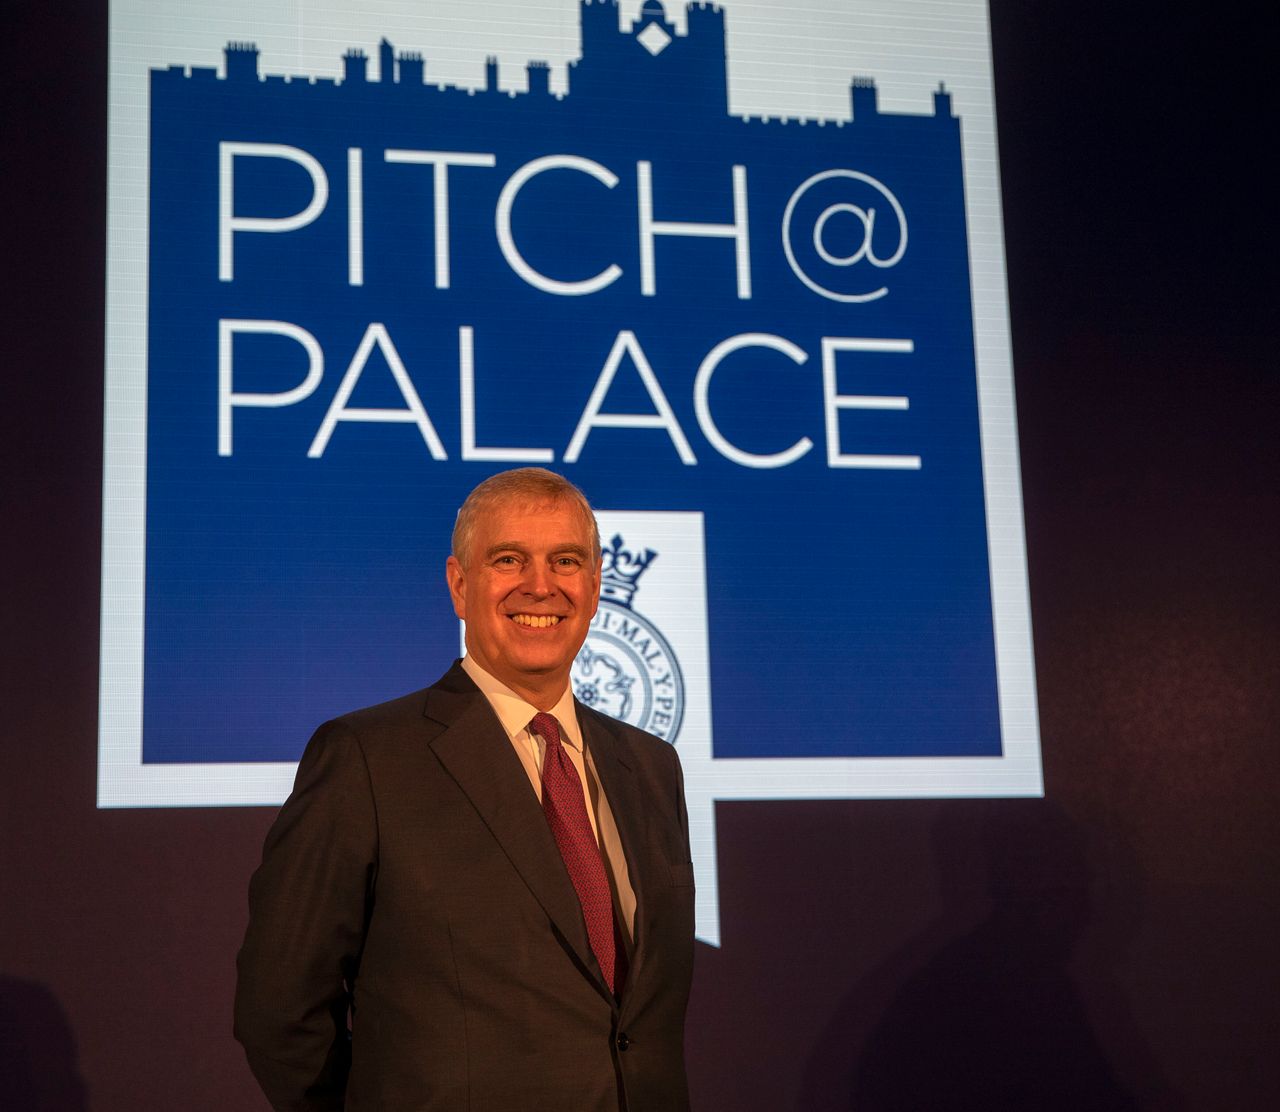 The Duke of York at a Pitch@Palace event at Buckingham Palace in London